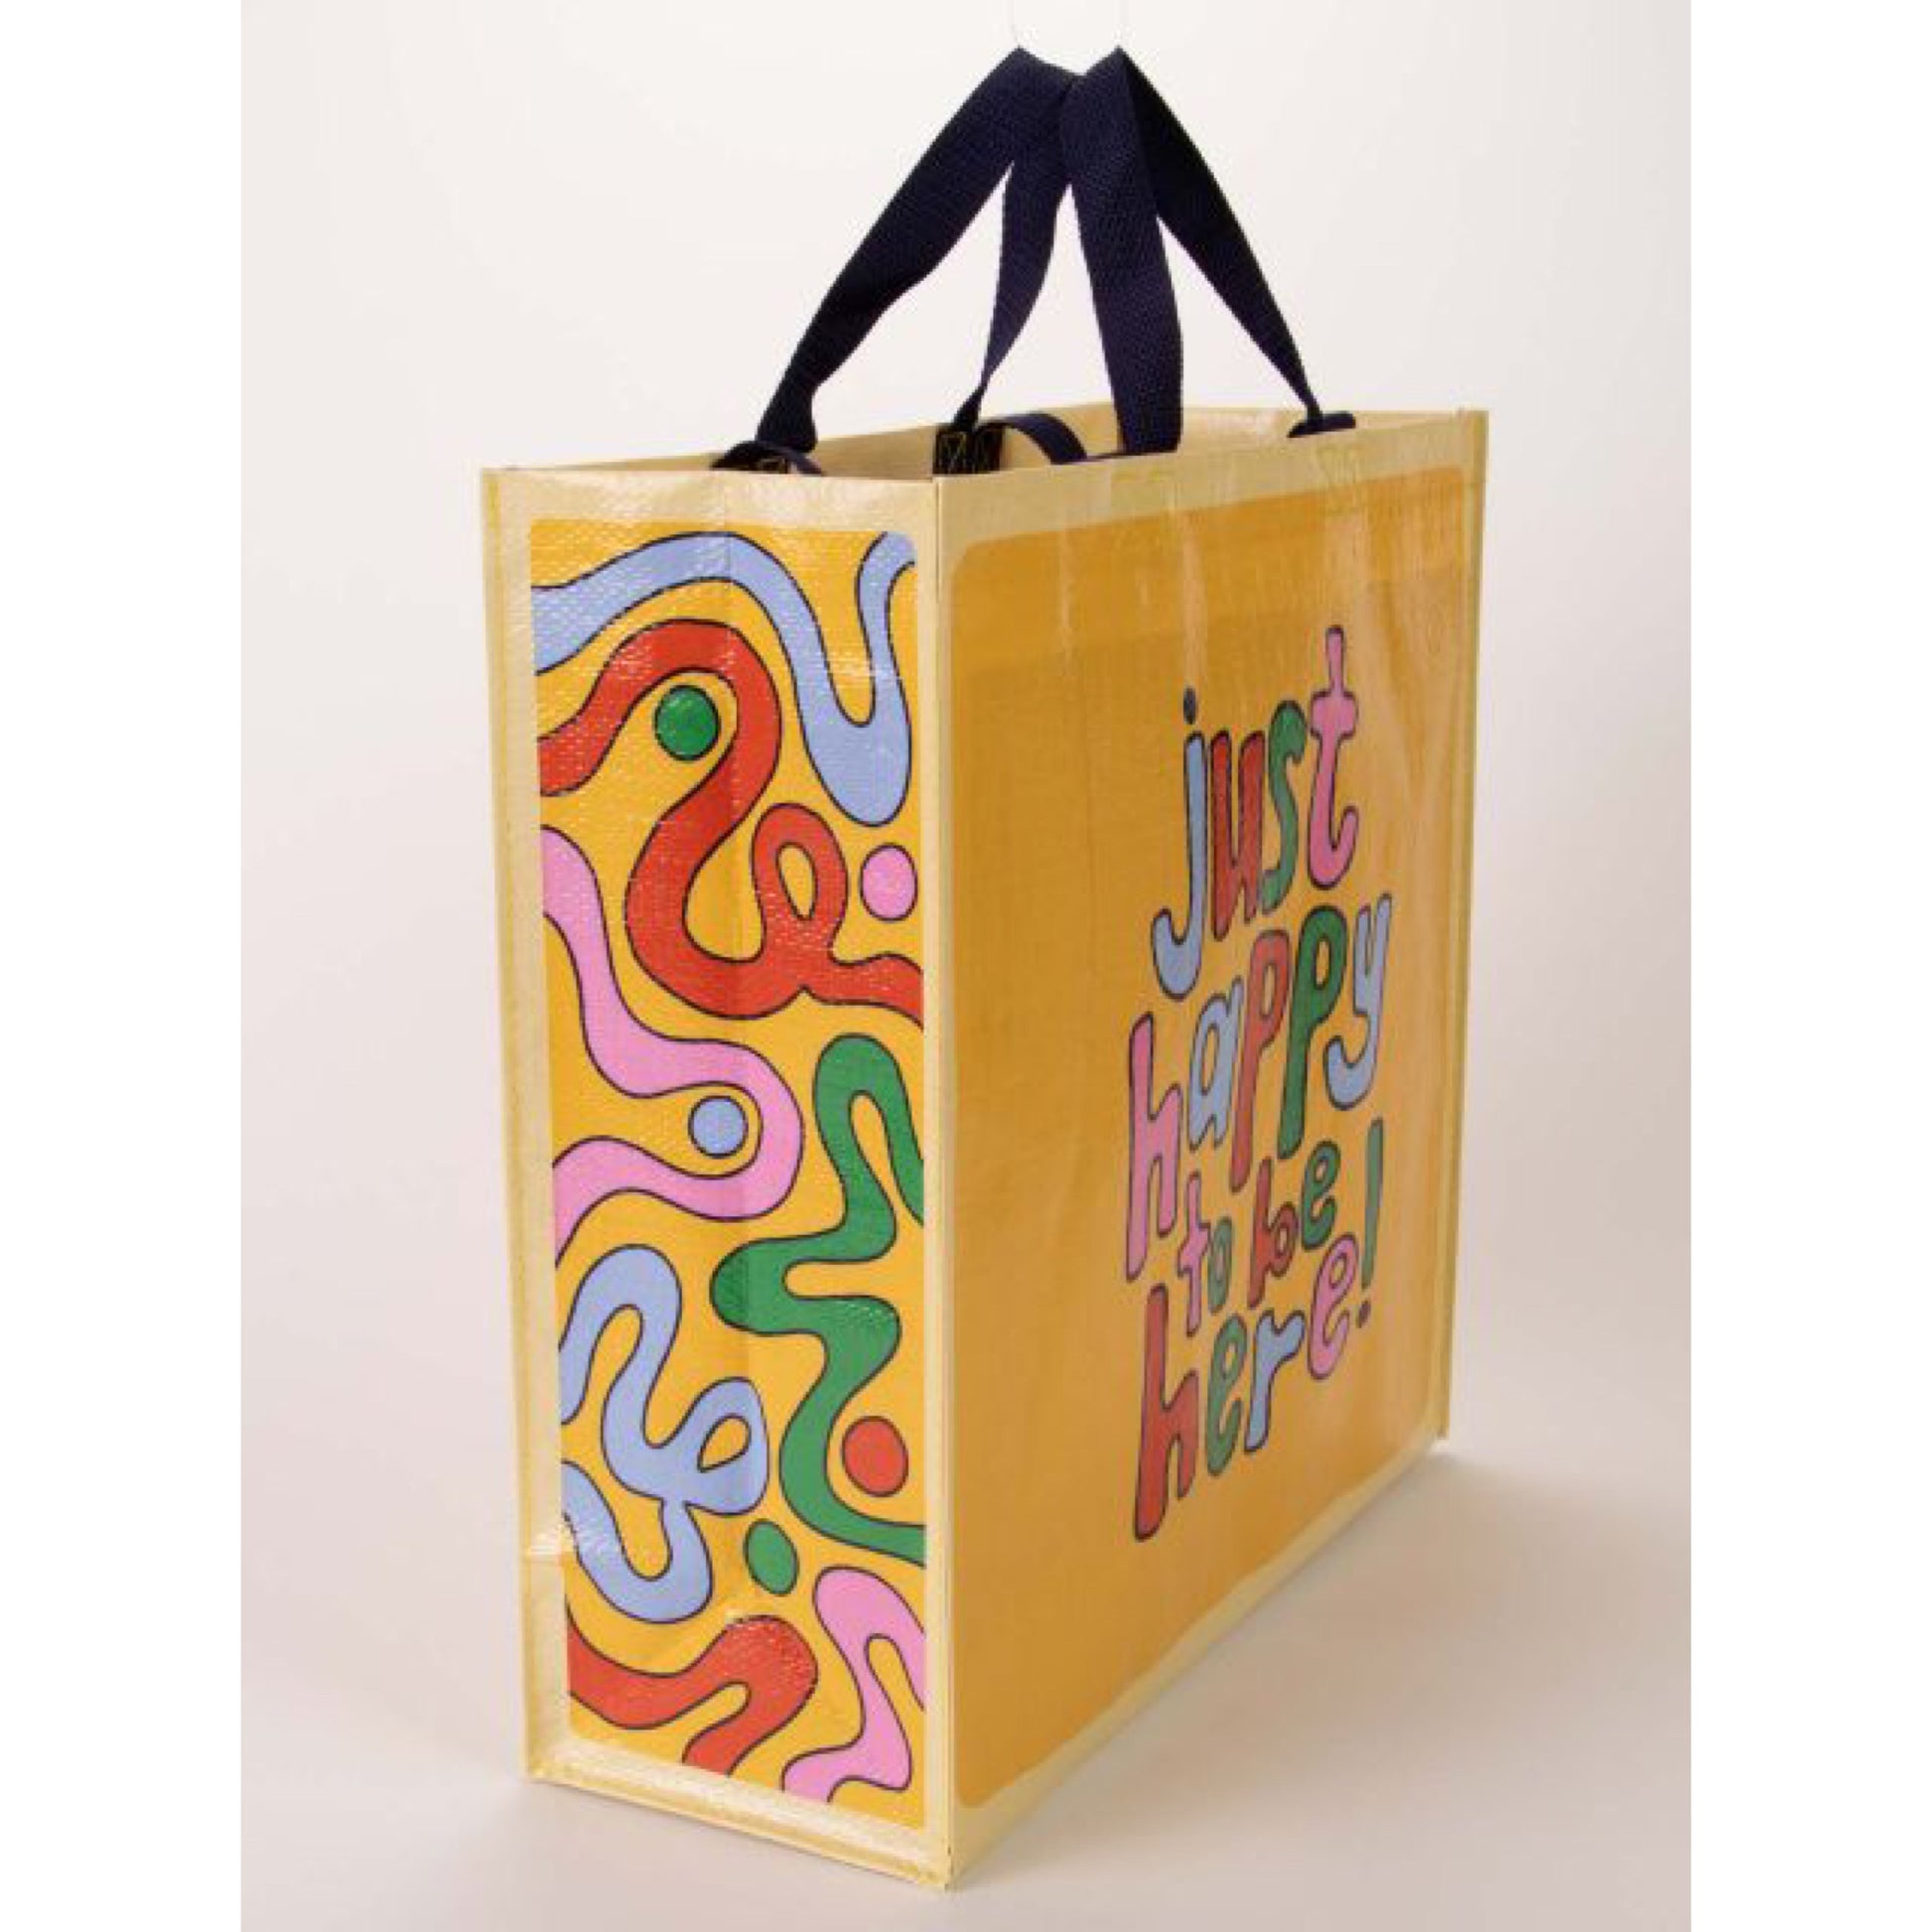 A yellow Blue Q tote bag with Blue, green, red and pink squiggles on the side. The text reads: Just happy to be here!